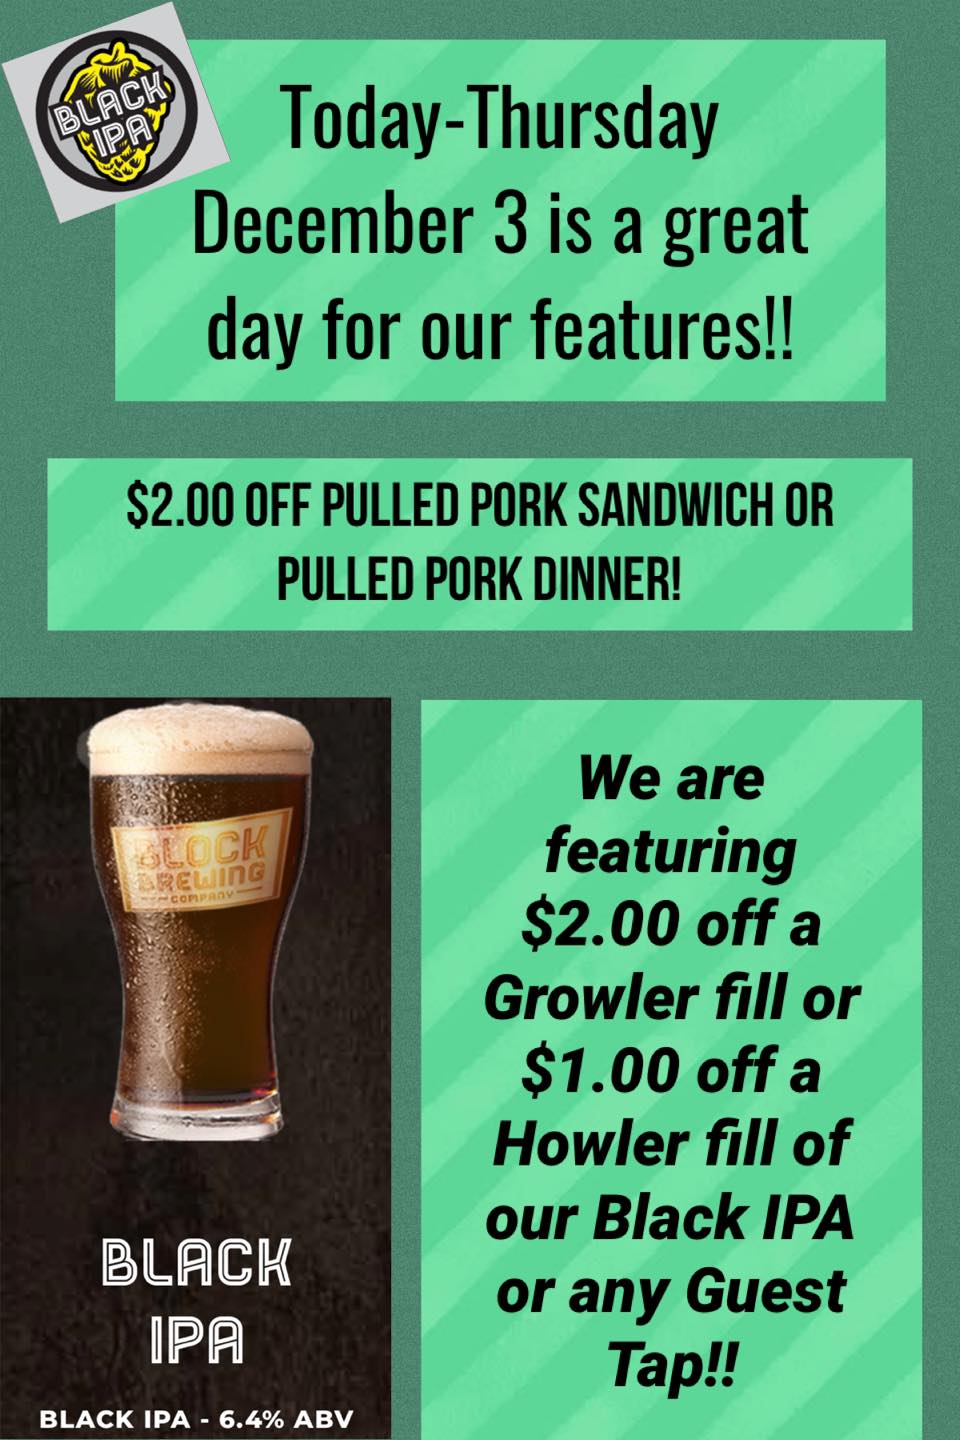 It’s Thirsty Thursday today! December 3, we are featuring $ off Pulled Pork Sandwich…